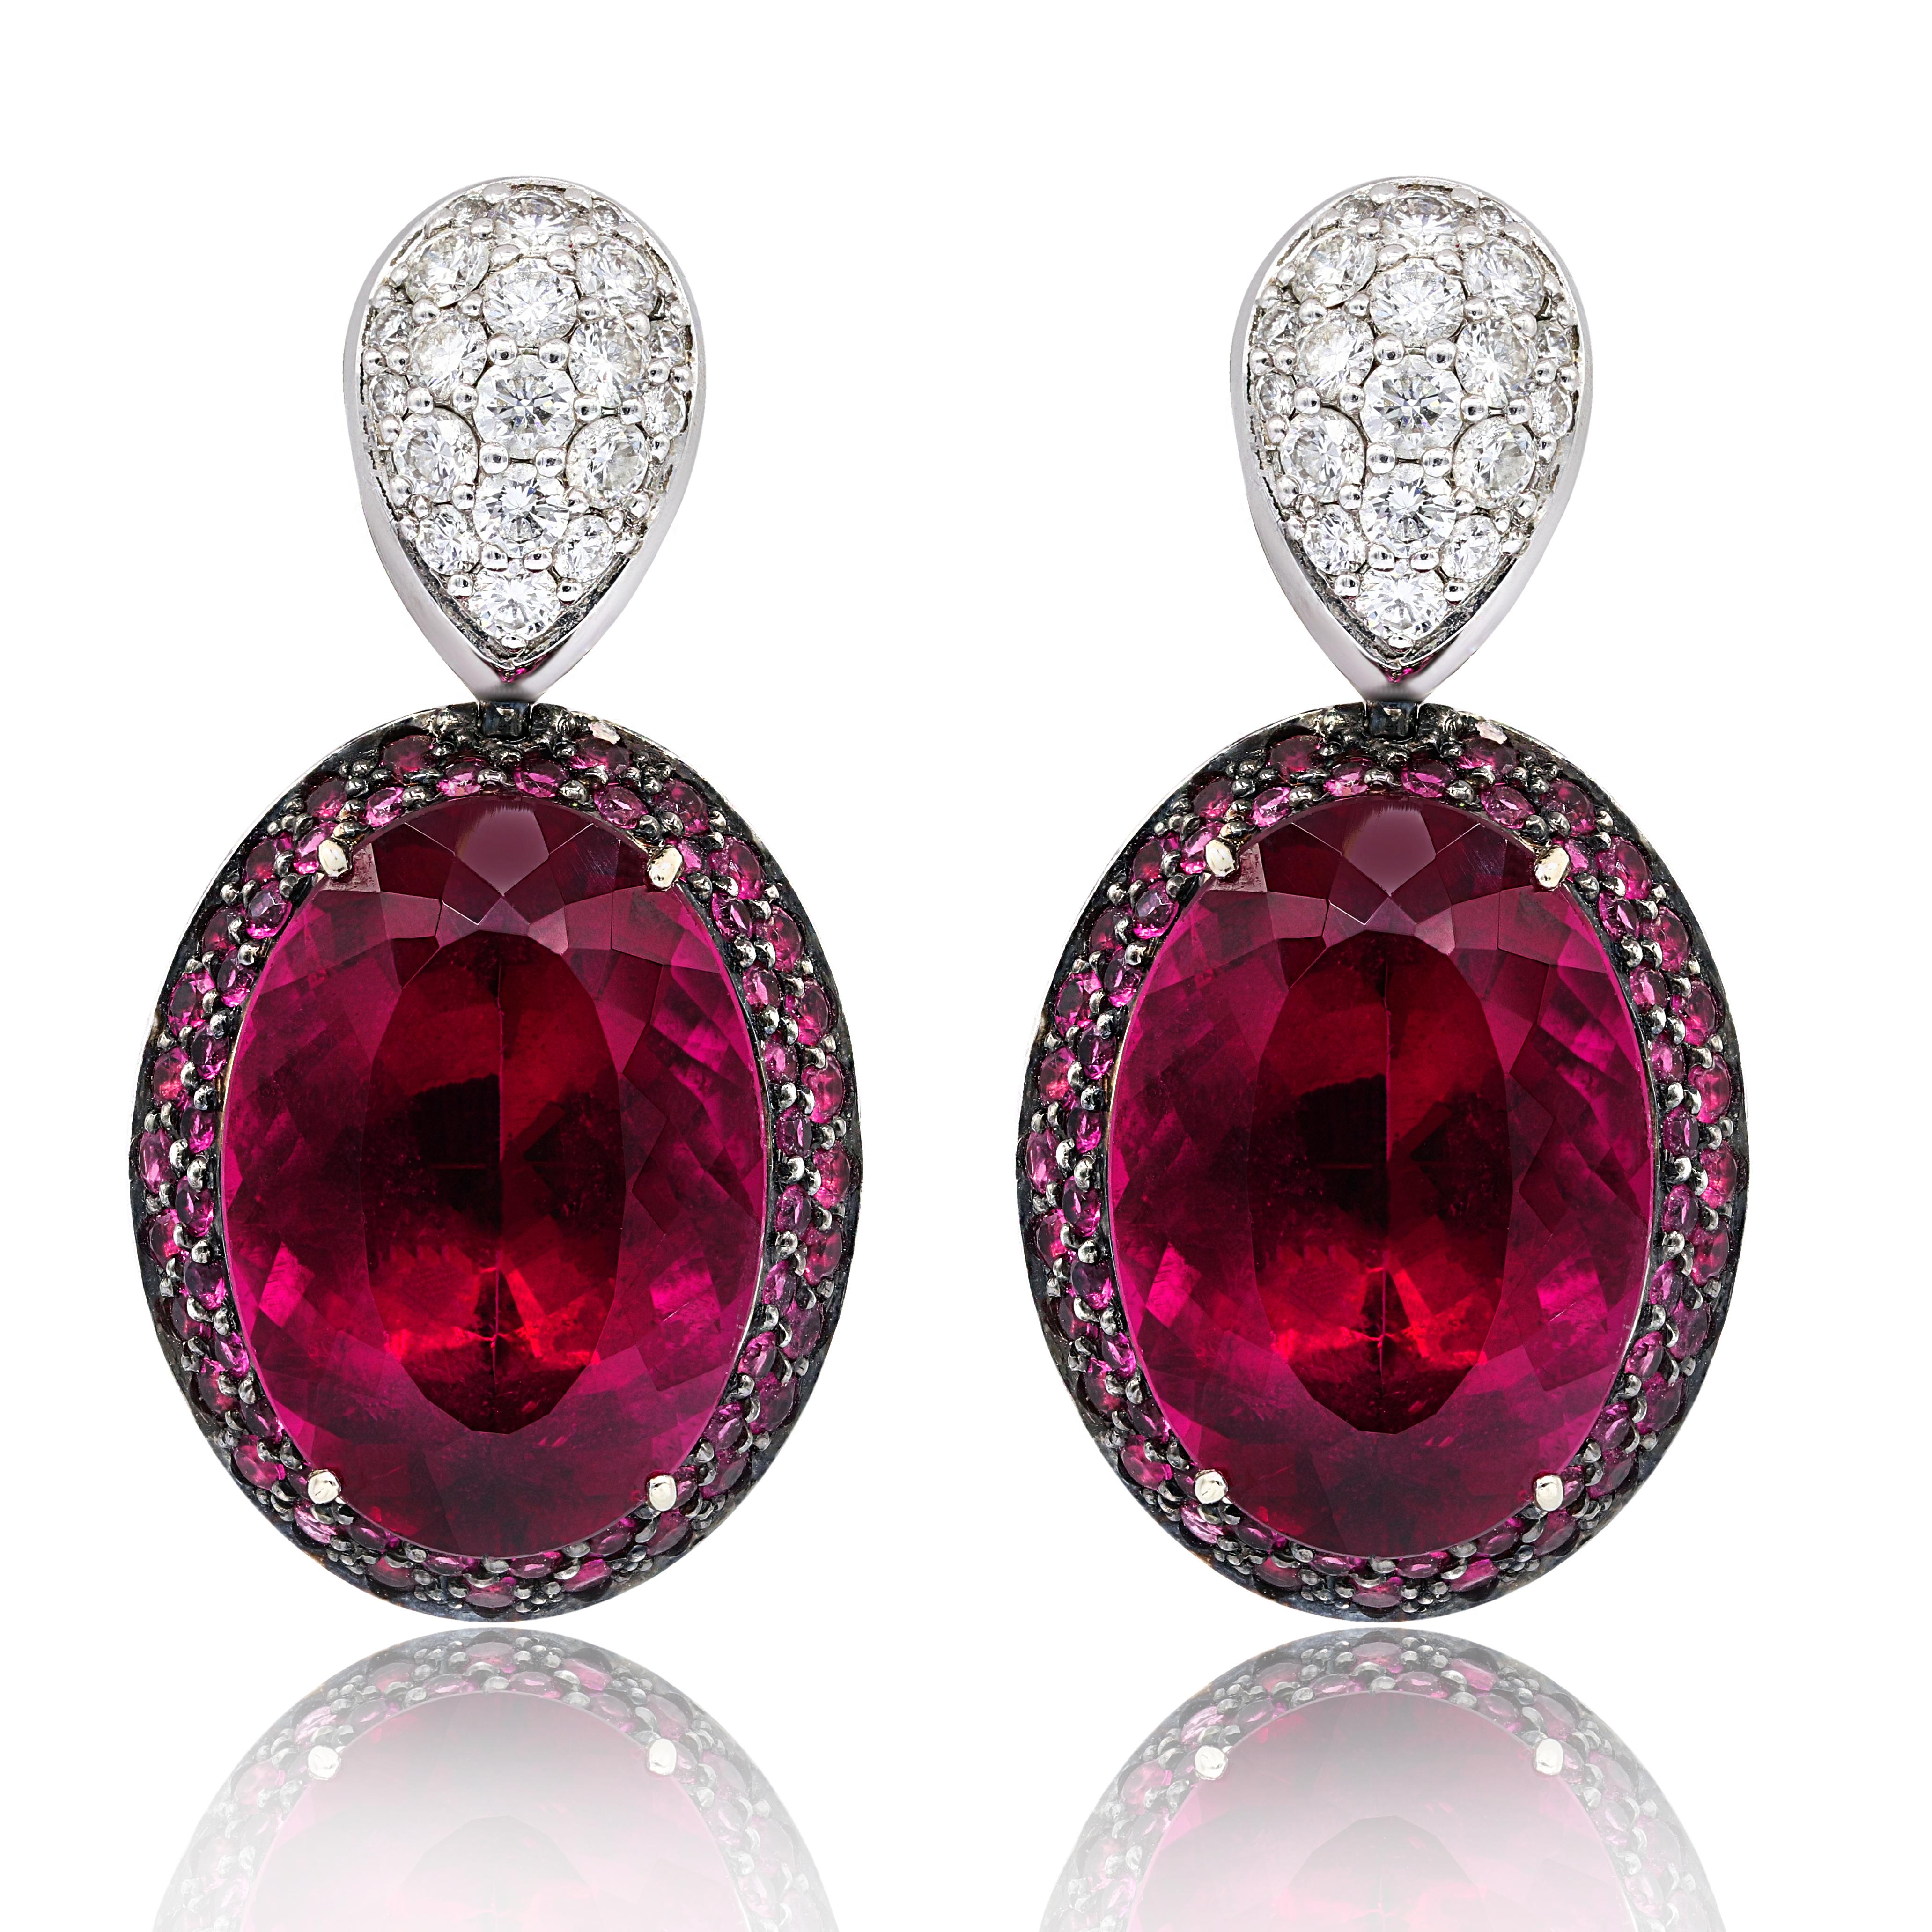 Oval Cut 18kt White Gold Tourmaline Diamond Earrings with a Diamond Top For Sale